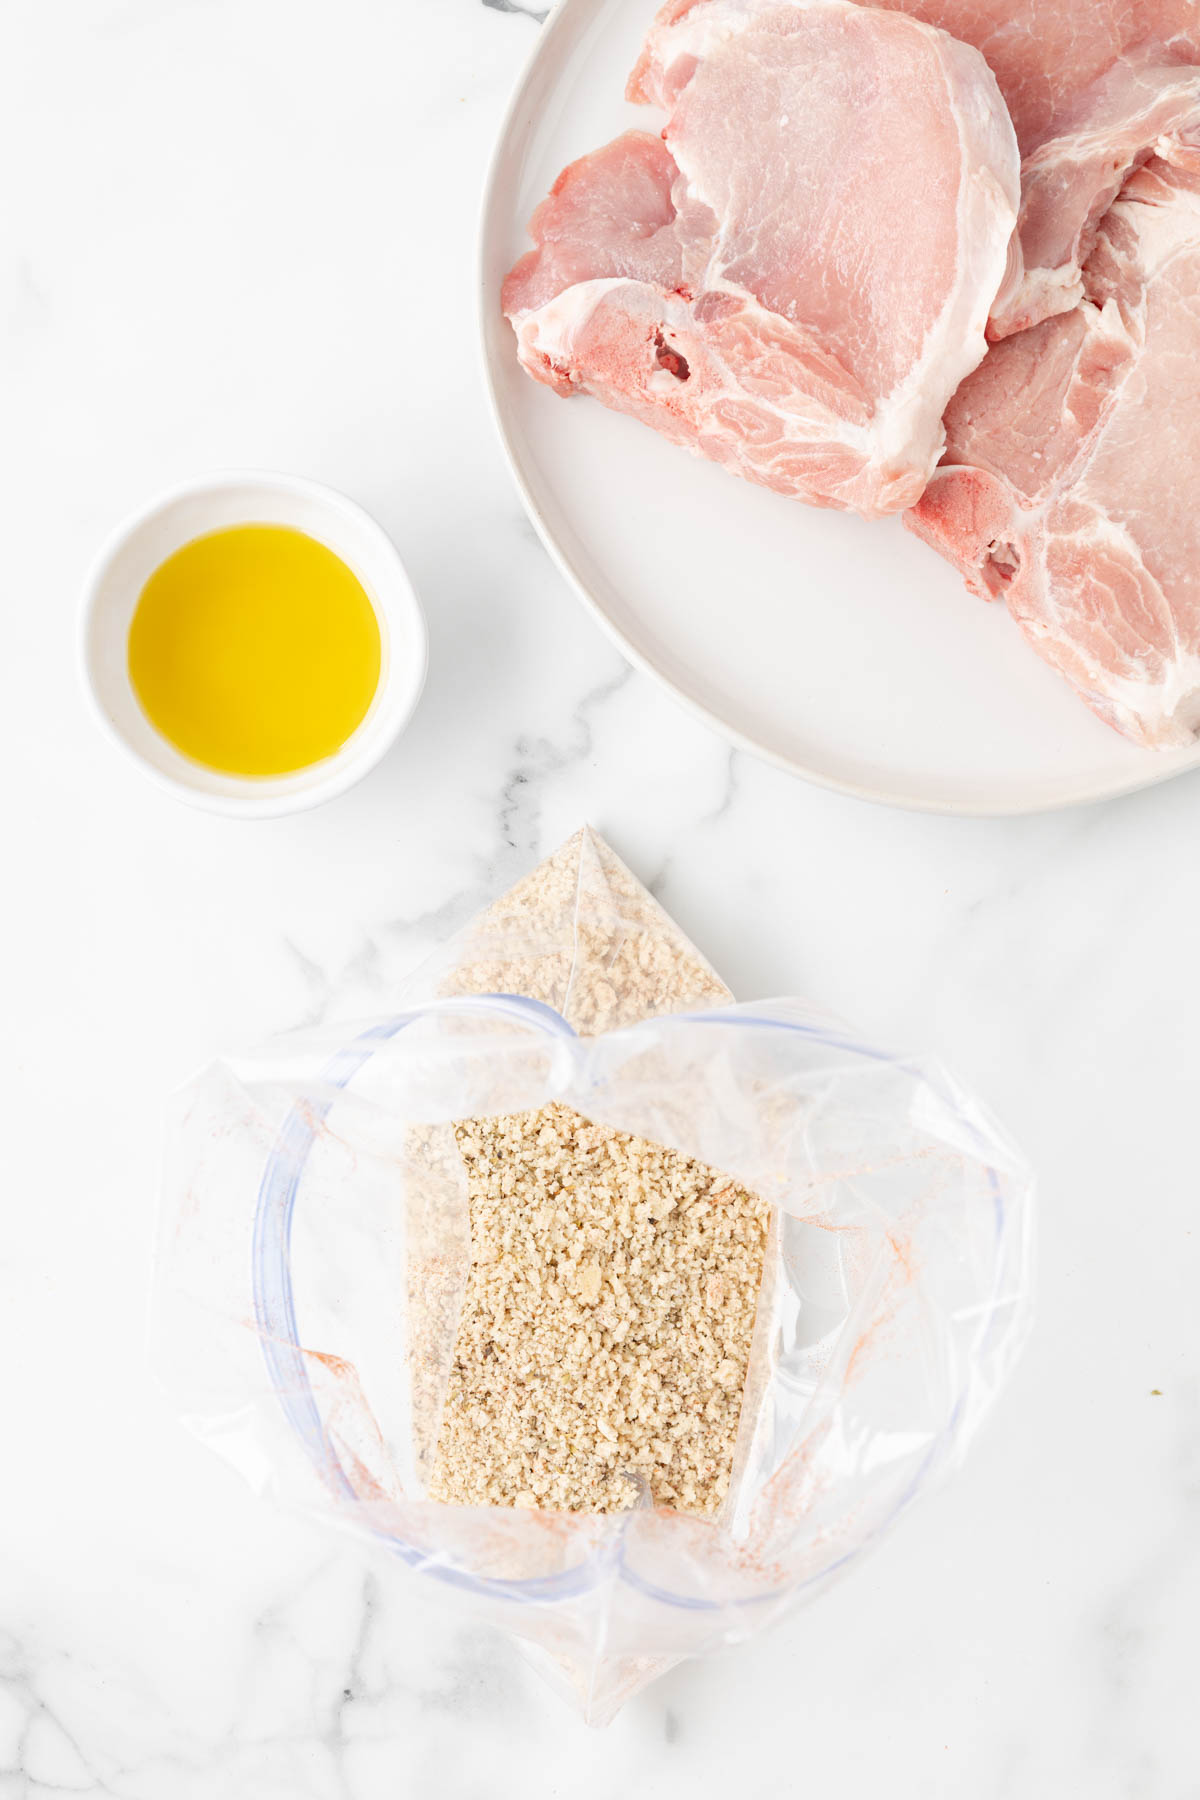 A zip top bag is filled with breadcrumbs and is set on a surface. A plate of pork chops and a small bowl of olive oil are nearby. 